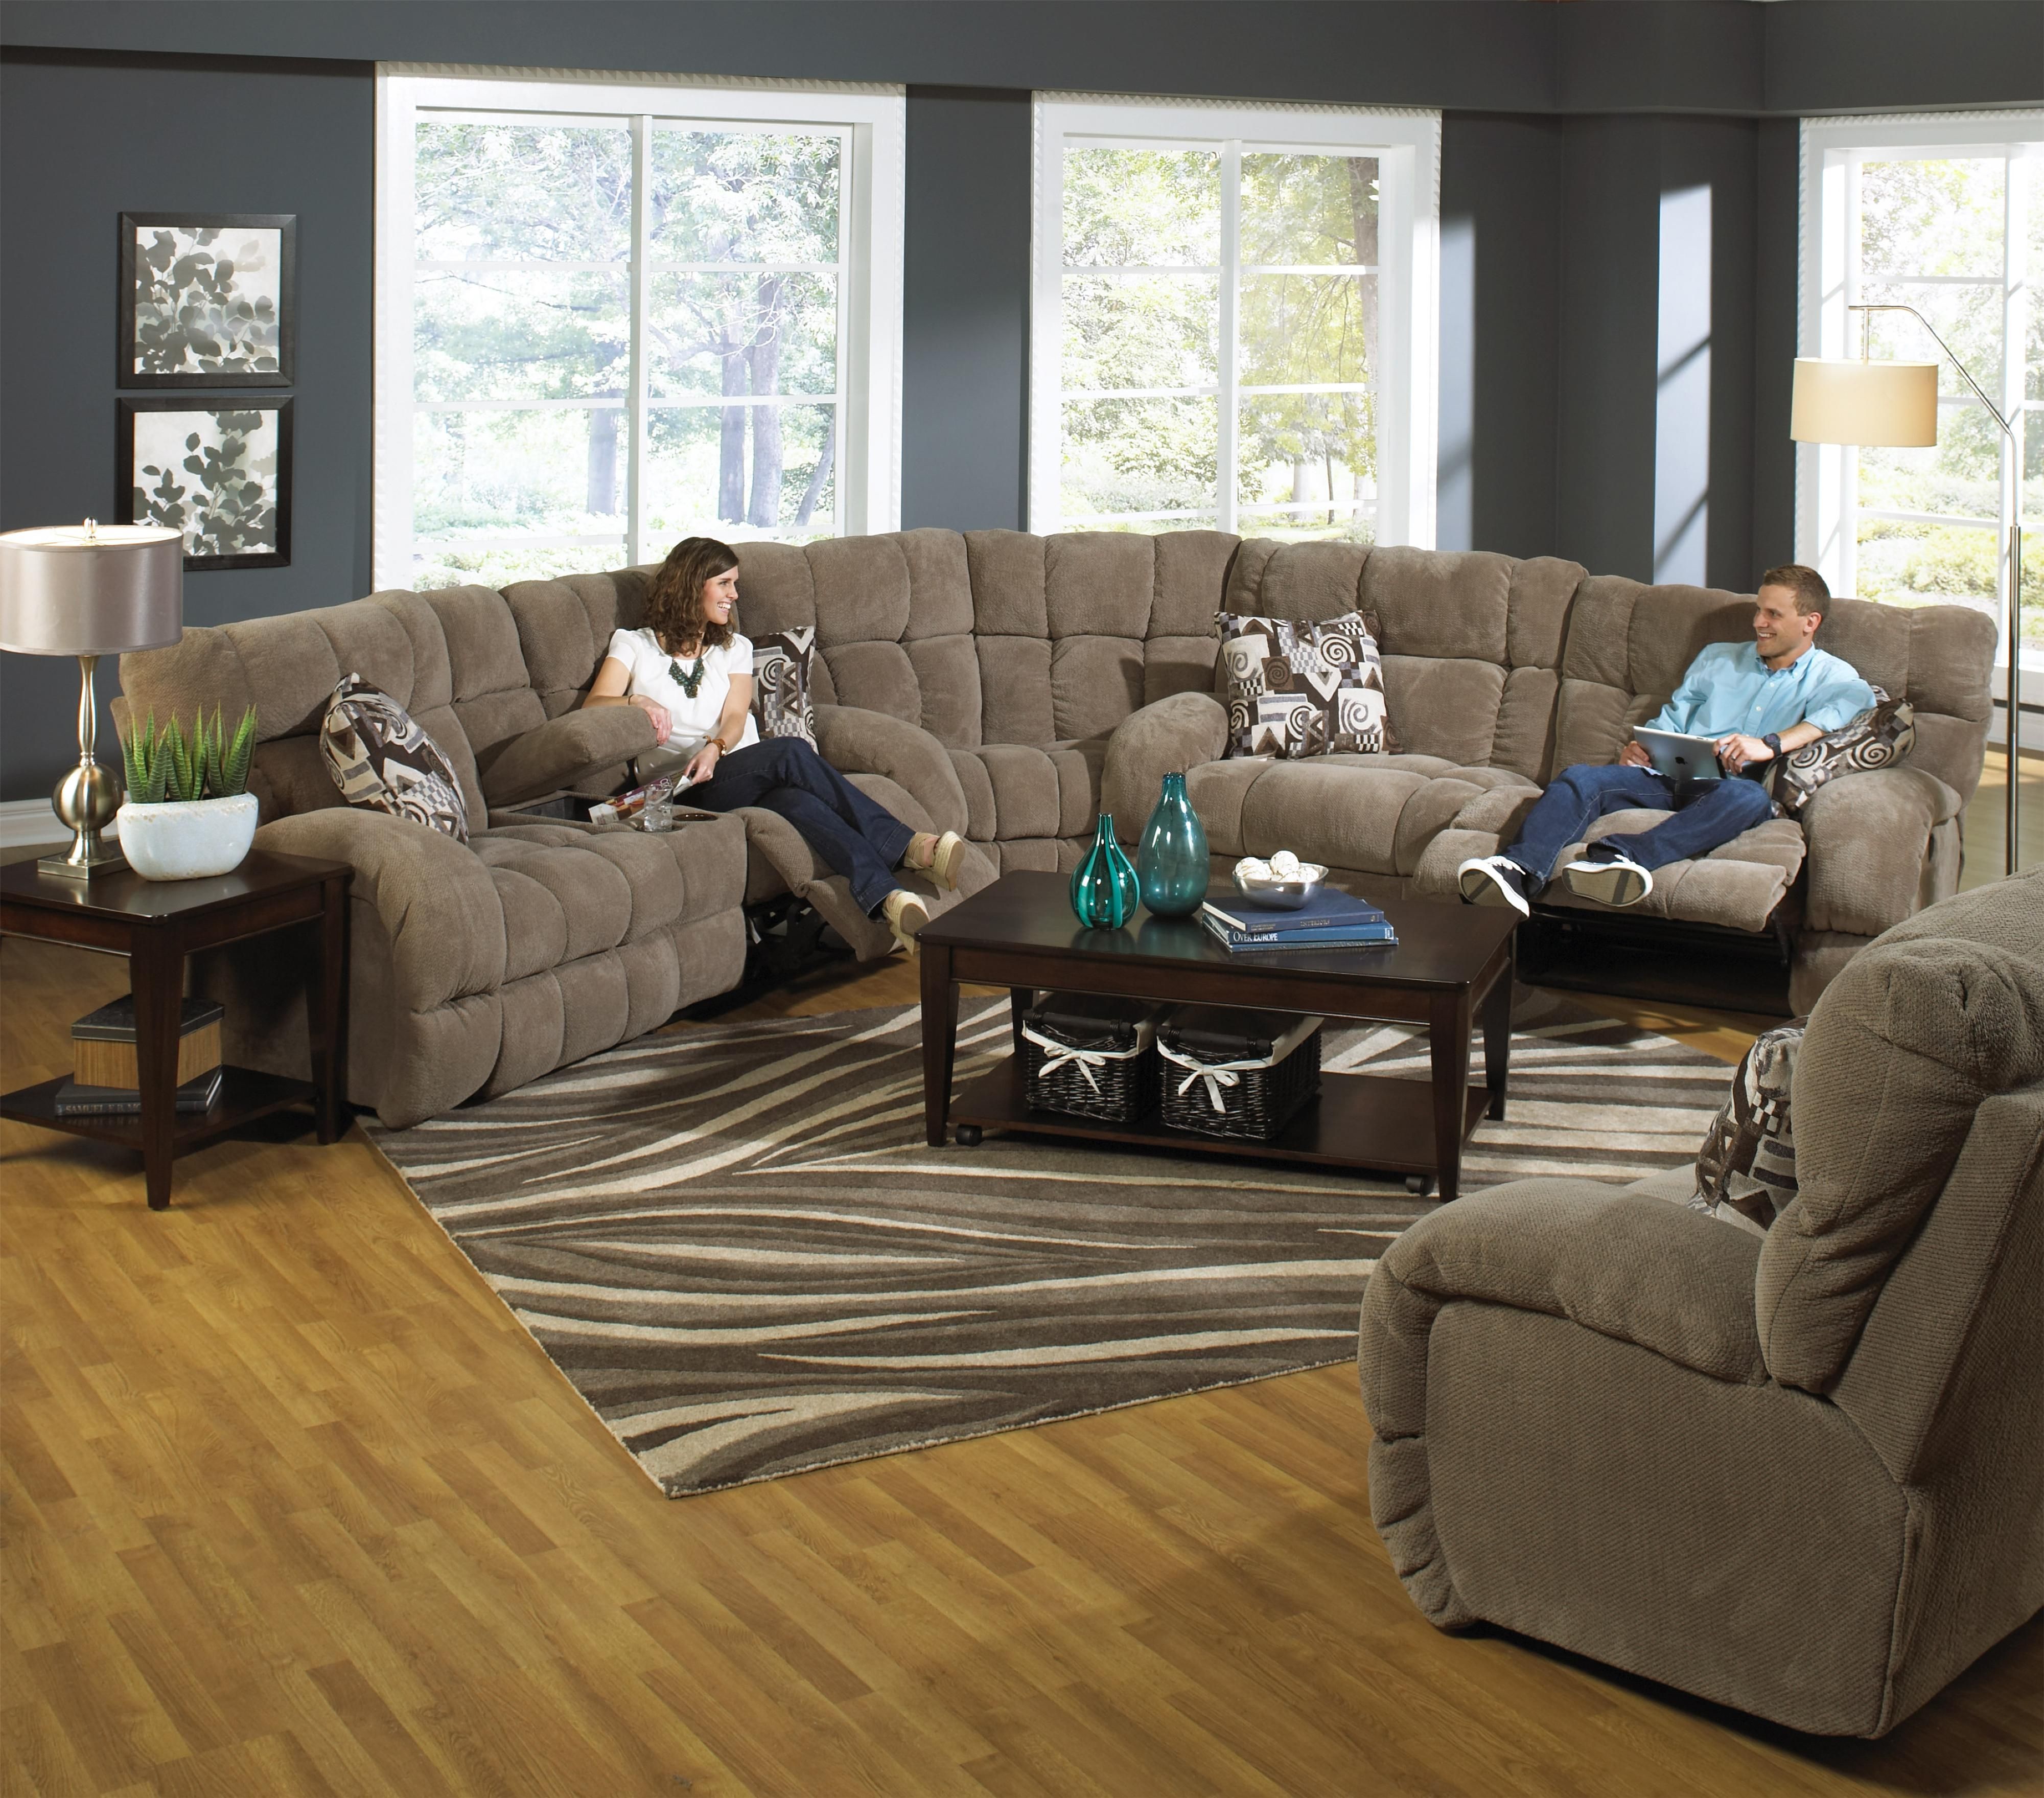 12 Photo of 7 Seat Sectional Sofa